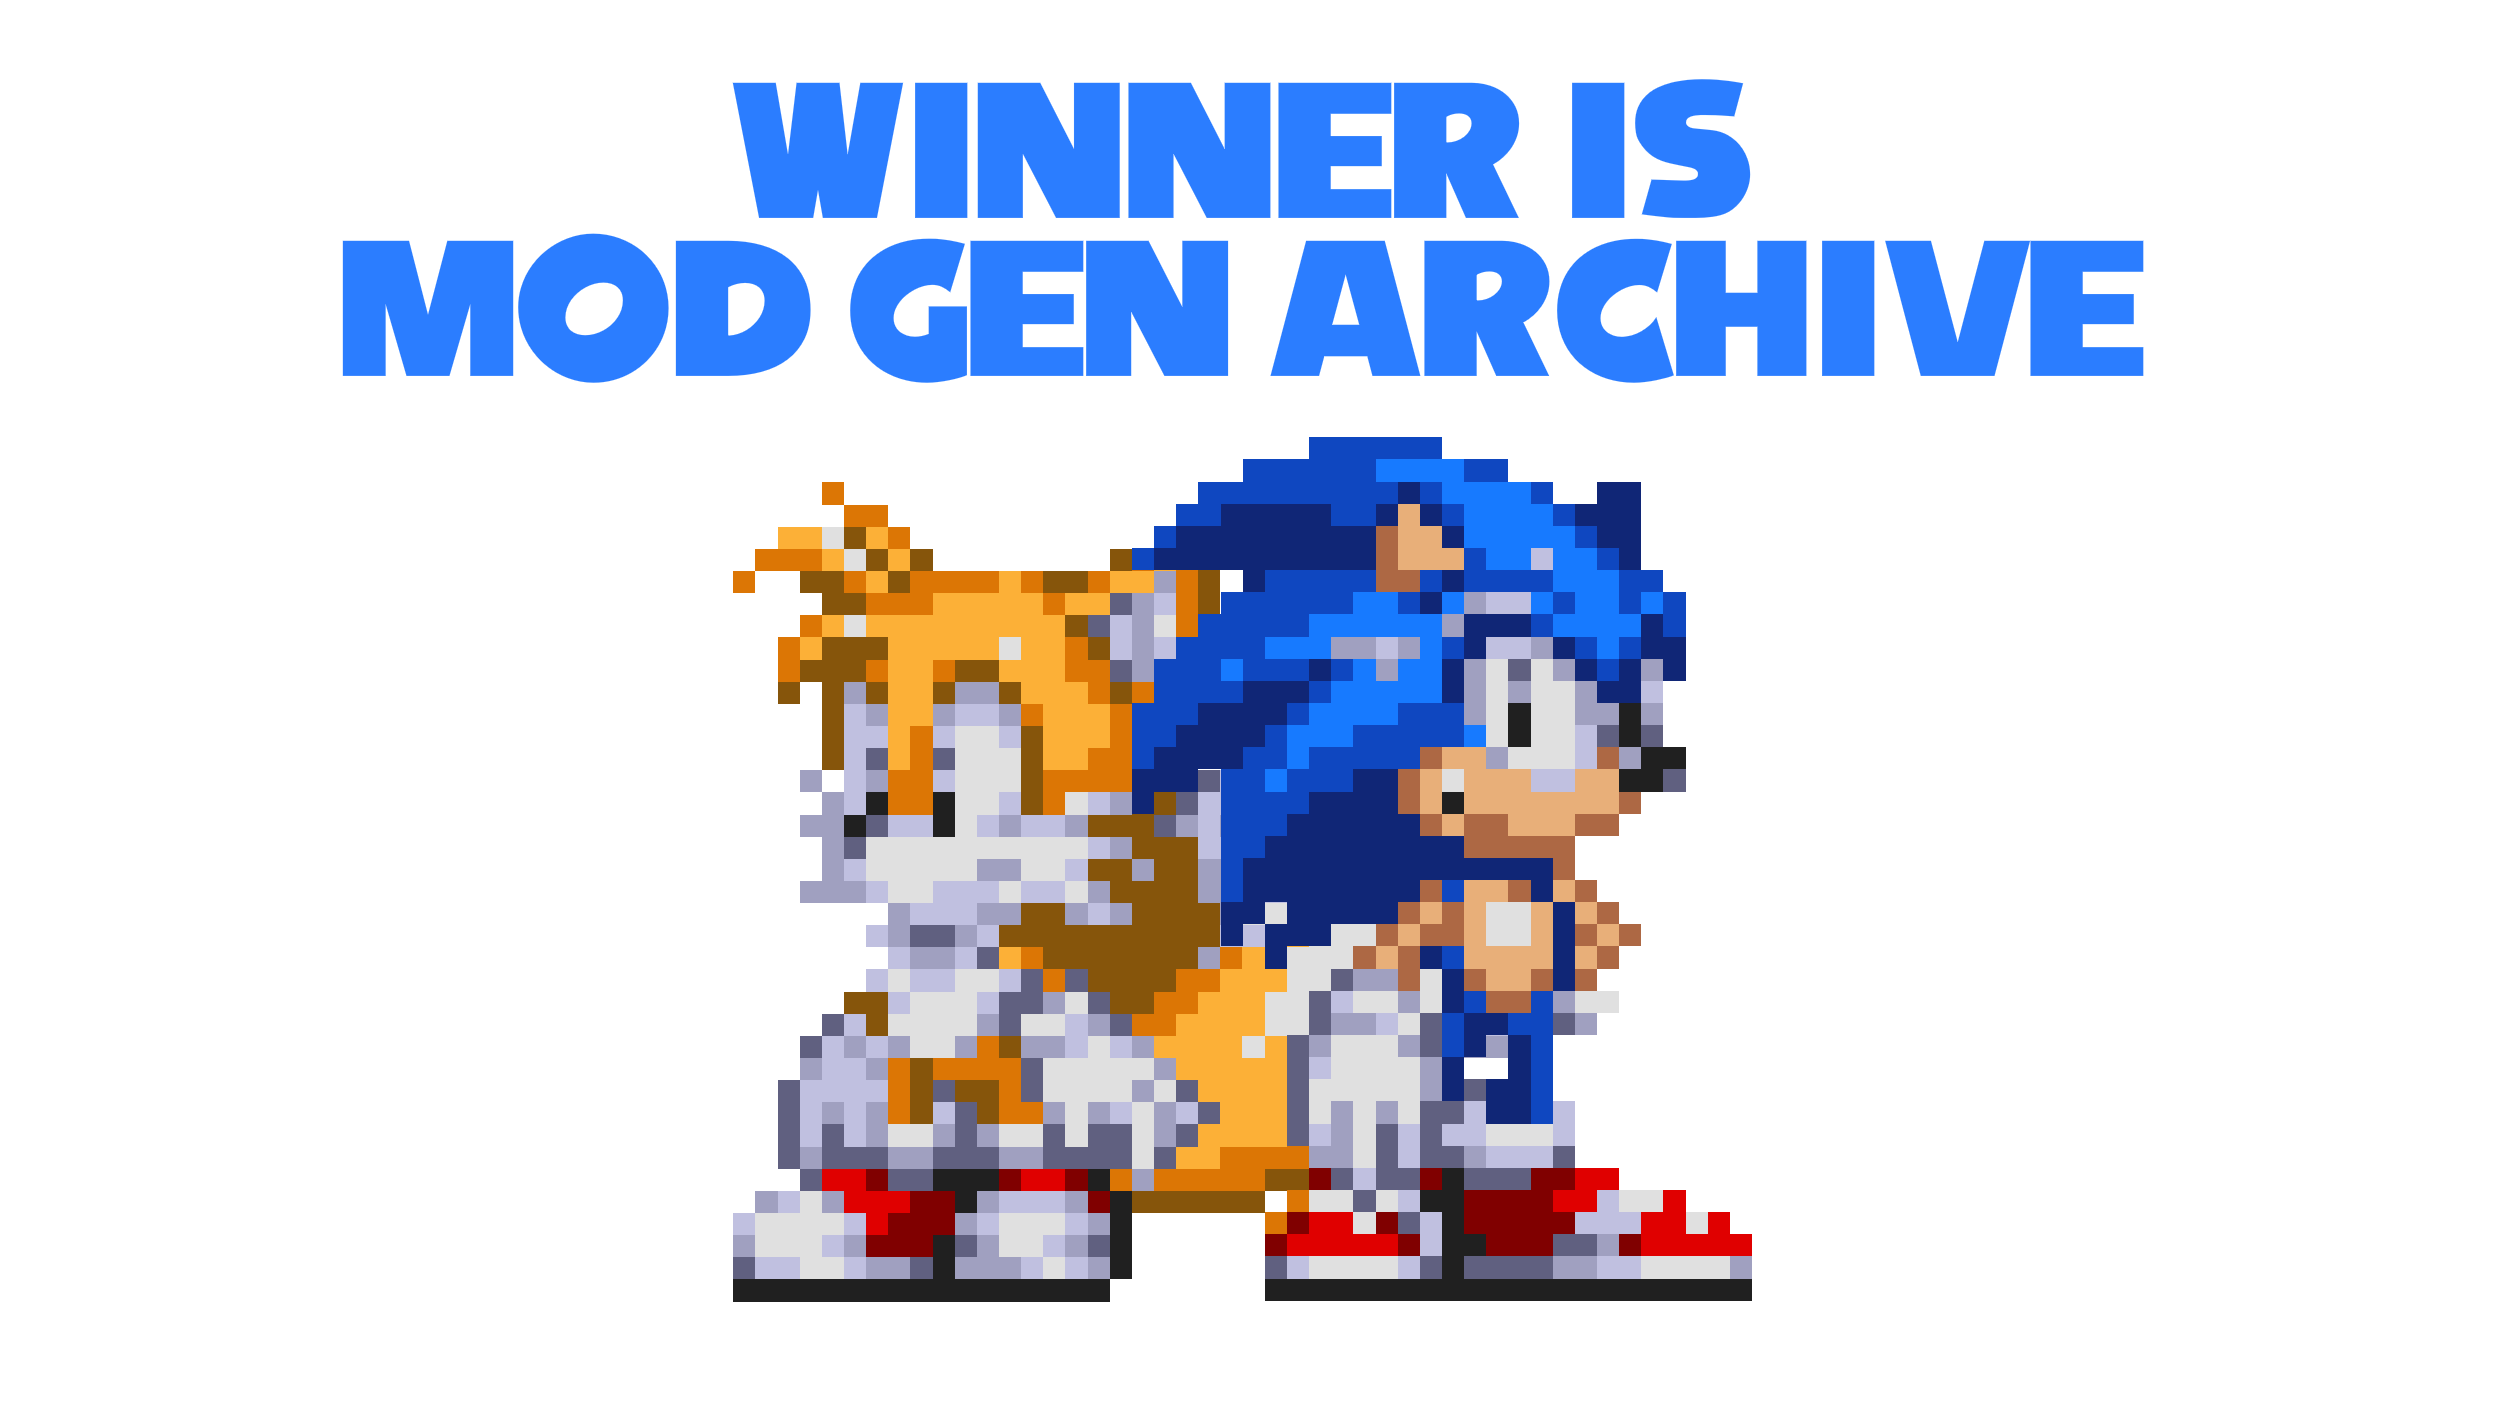 Mod Gen Archive – This is a archive for the Modern Genesis Project